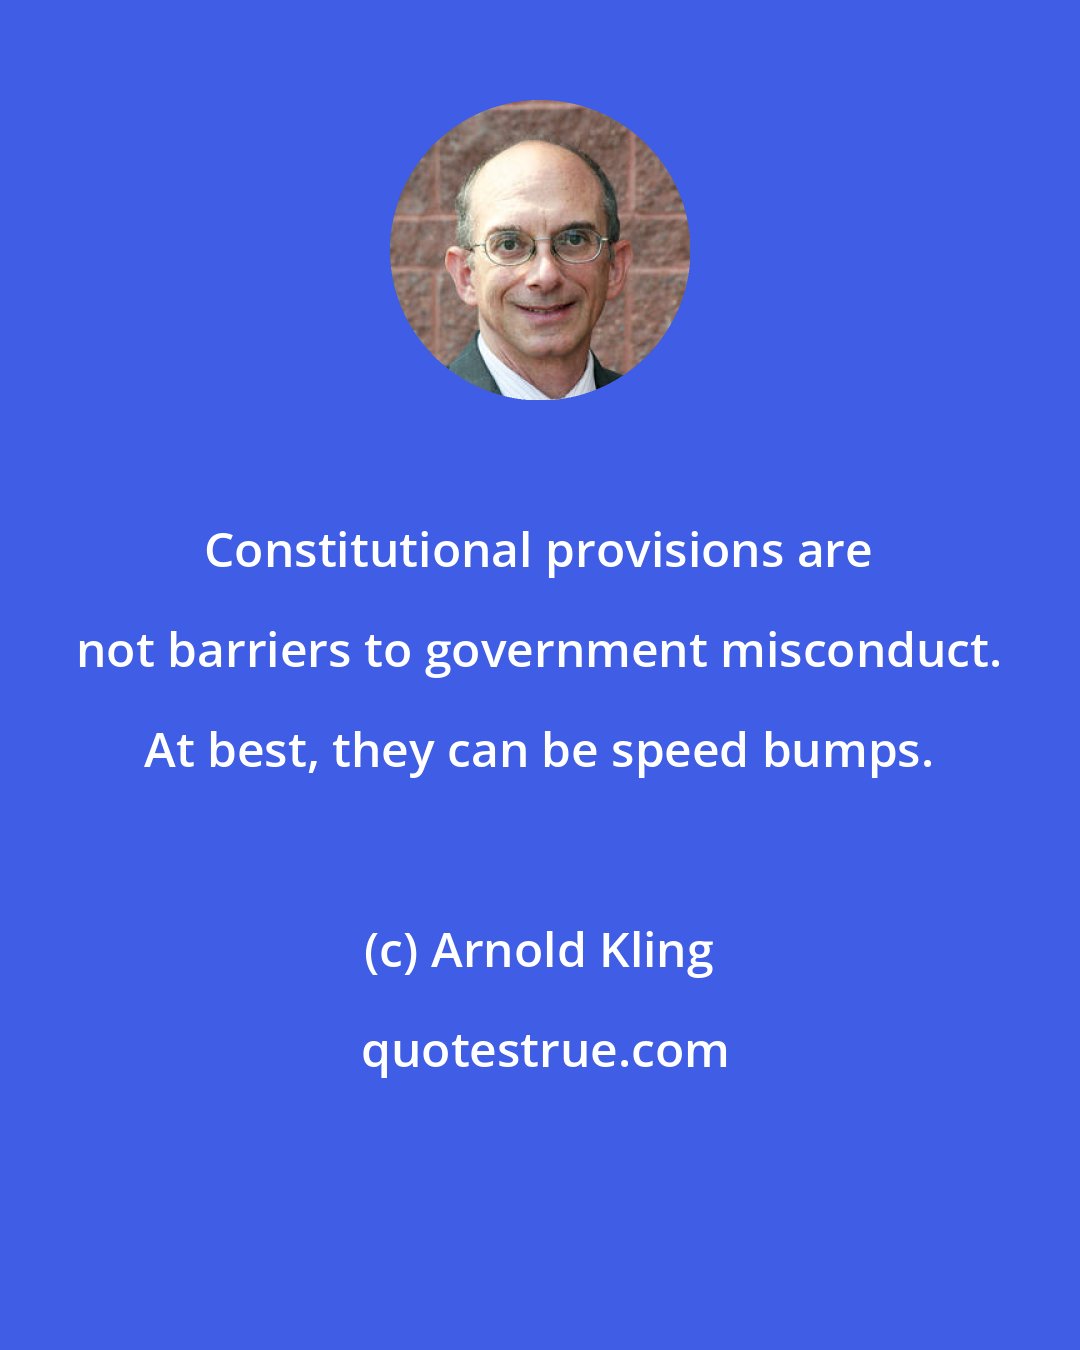 Arnold Kling: Constitutional provisions are not barriers to government misconduct. At best, they can be speed bumps.